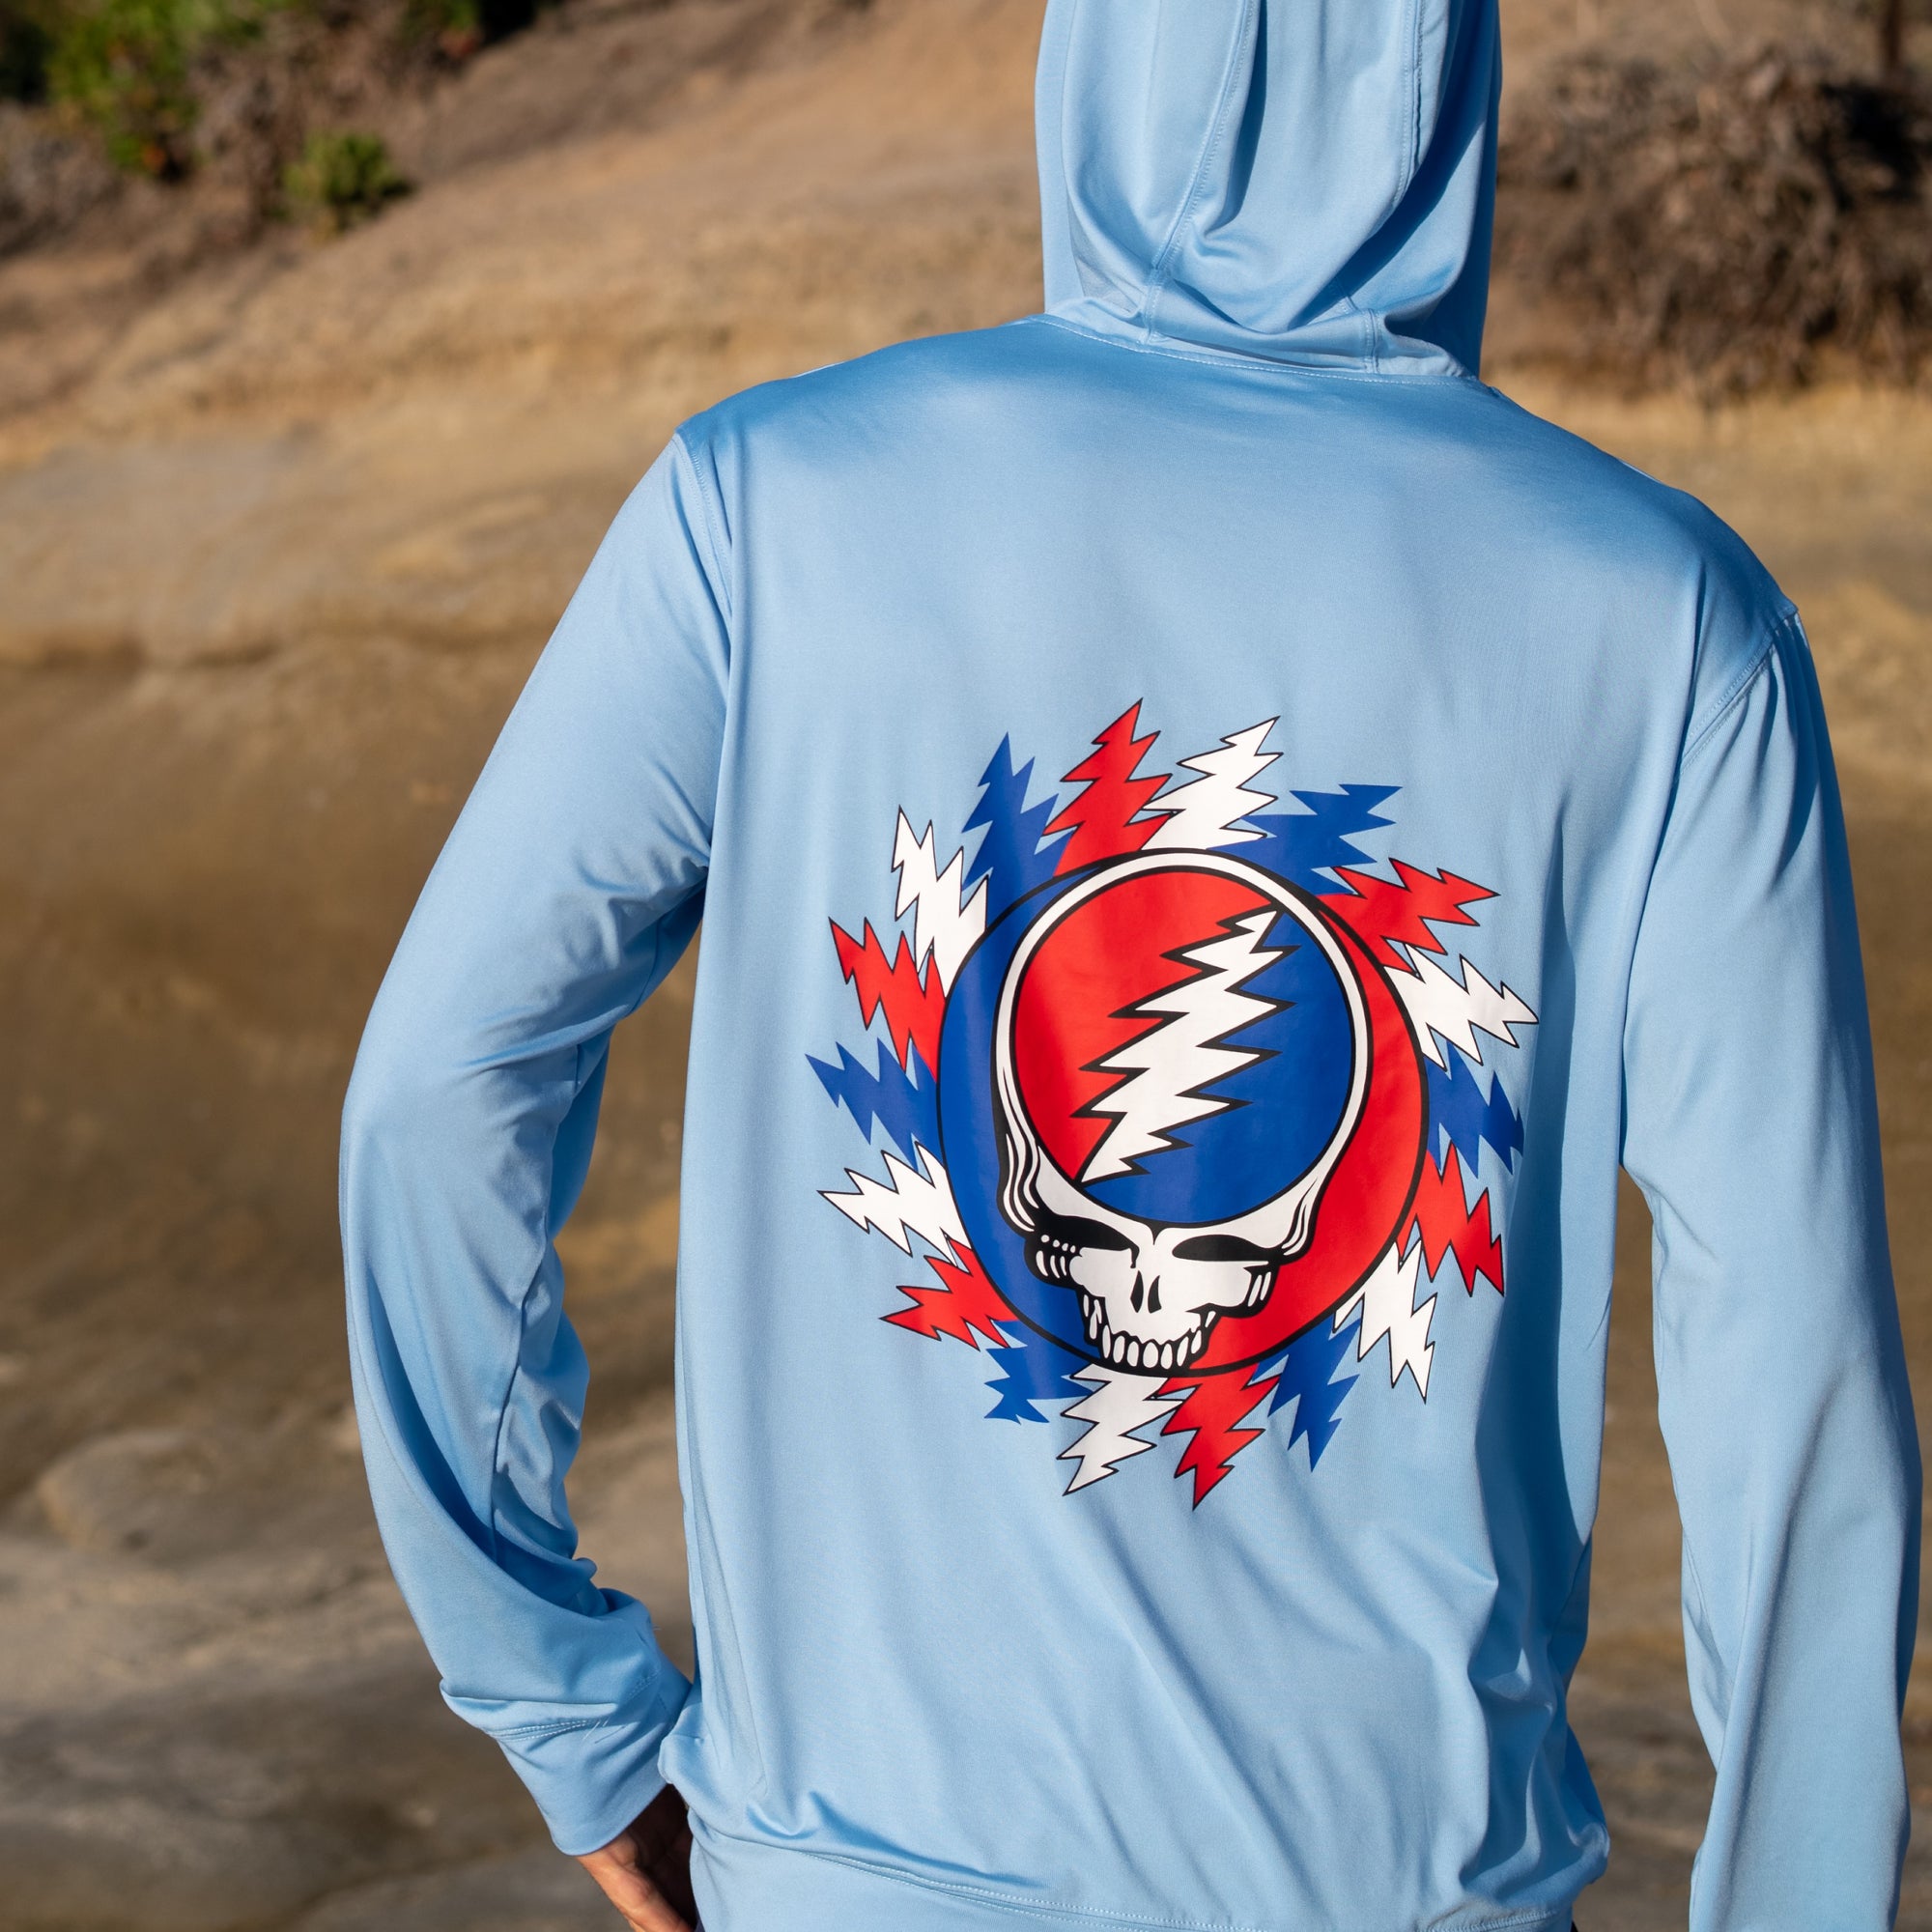 GRATEFUL DEAD HOODIE LW OUTDOOR RED WHITE AND BLUE - Section 119